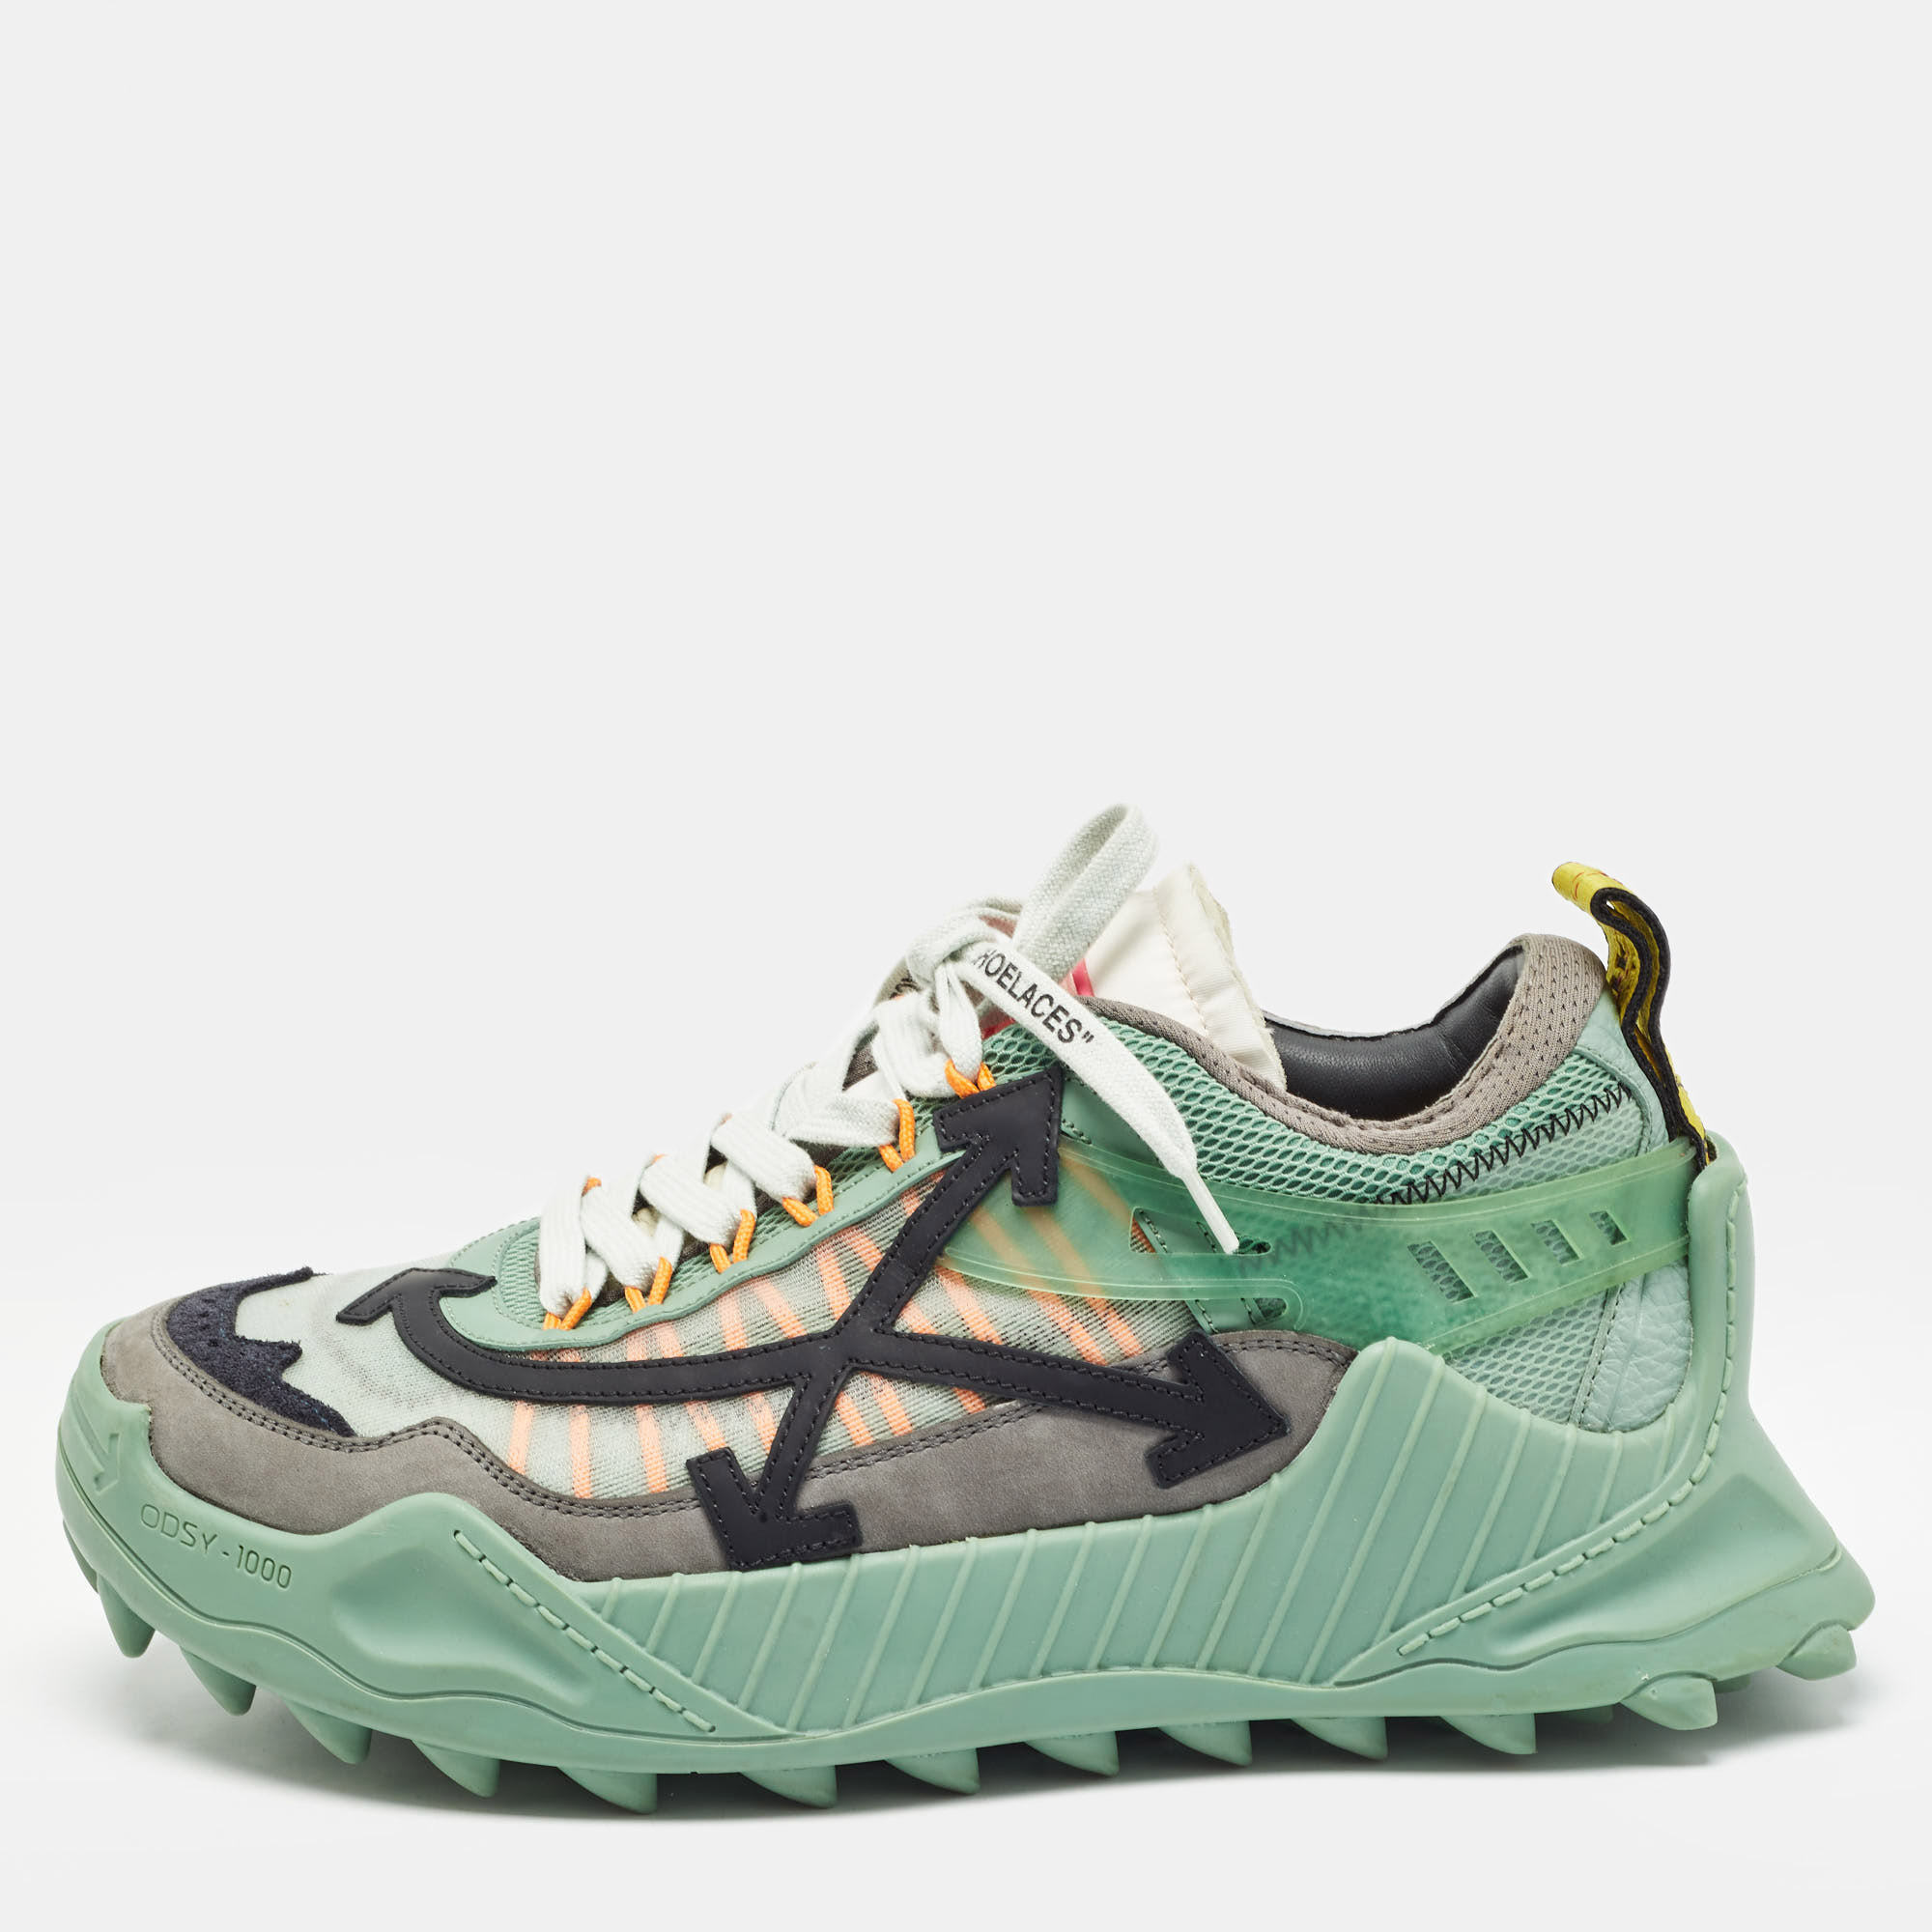 

Off-White Multicolor Mesh and Nubuck Leather Odsy-1000 Sneakers Size